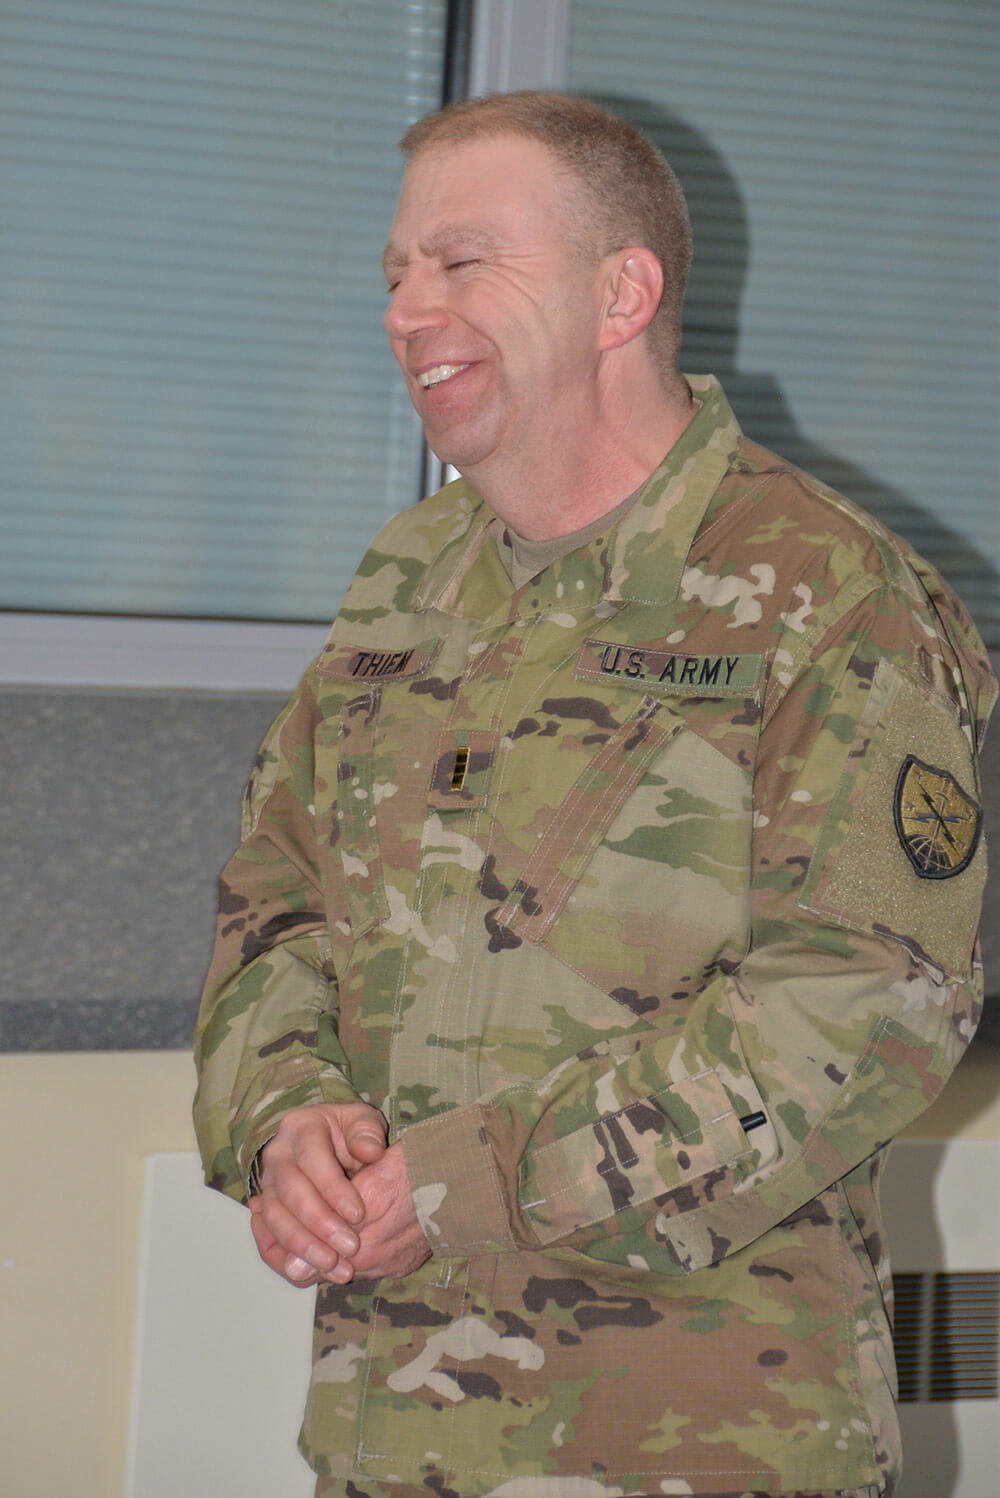 CW3 Albert Thiem smiles after his promotion ceremony at the Division of Military and Naval Affairs Headquarters in Latham, N.Y., Nov. 9, 2018. New York Army National Guard photo by CPT Jean Marie Kratzer